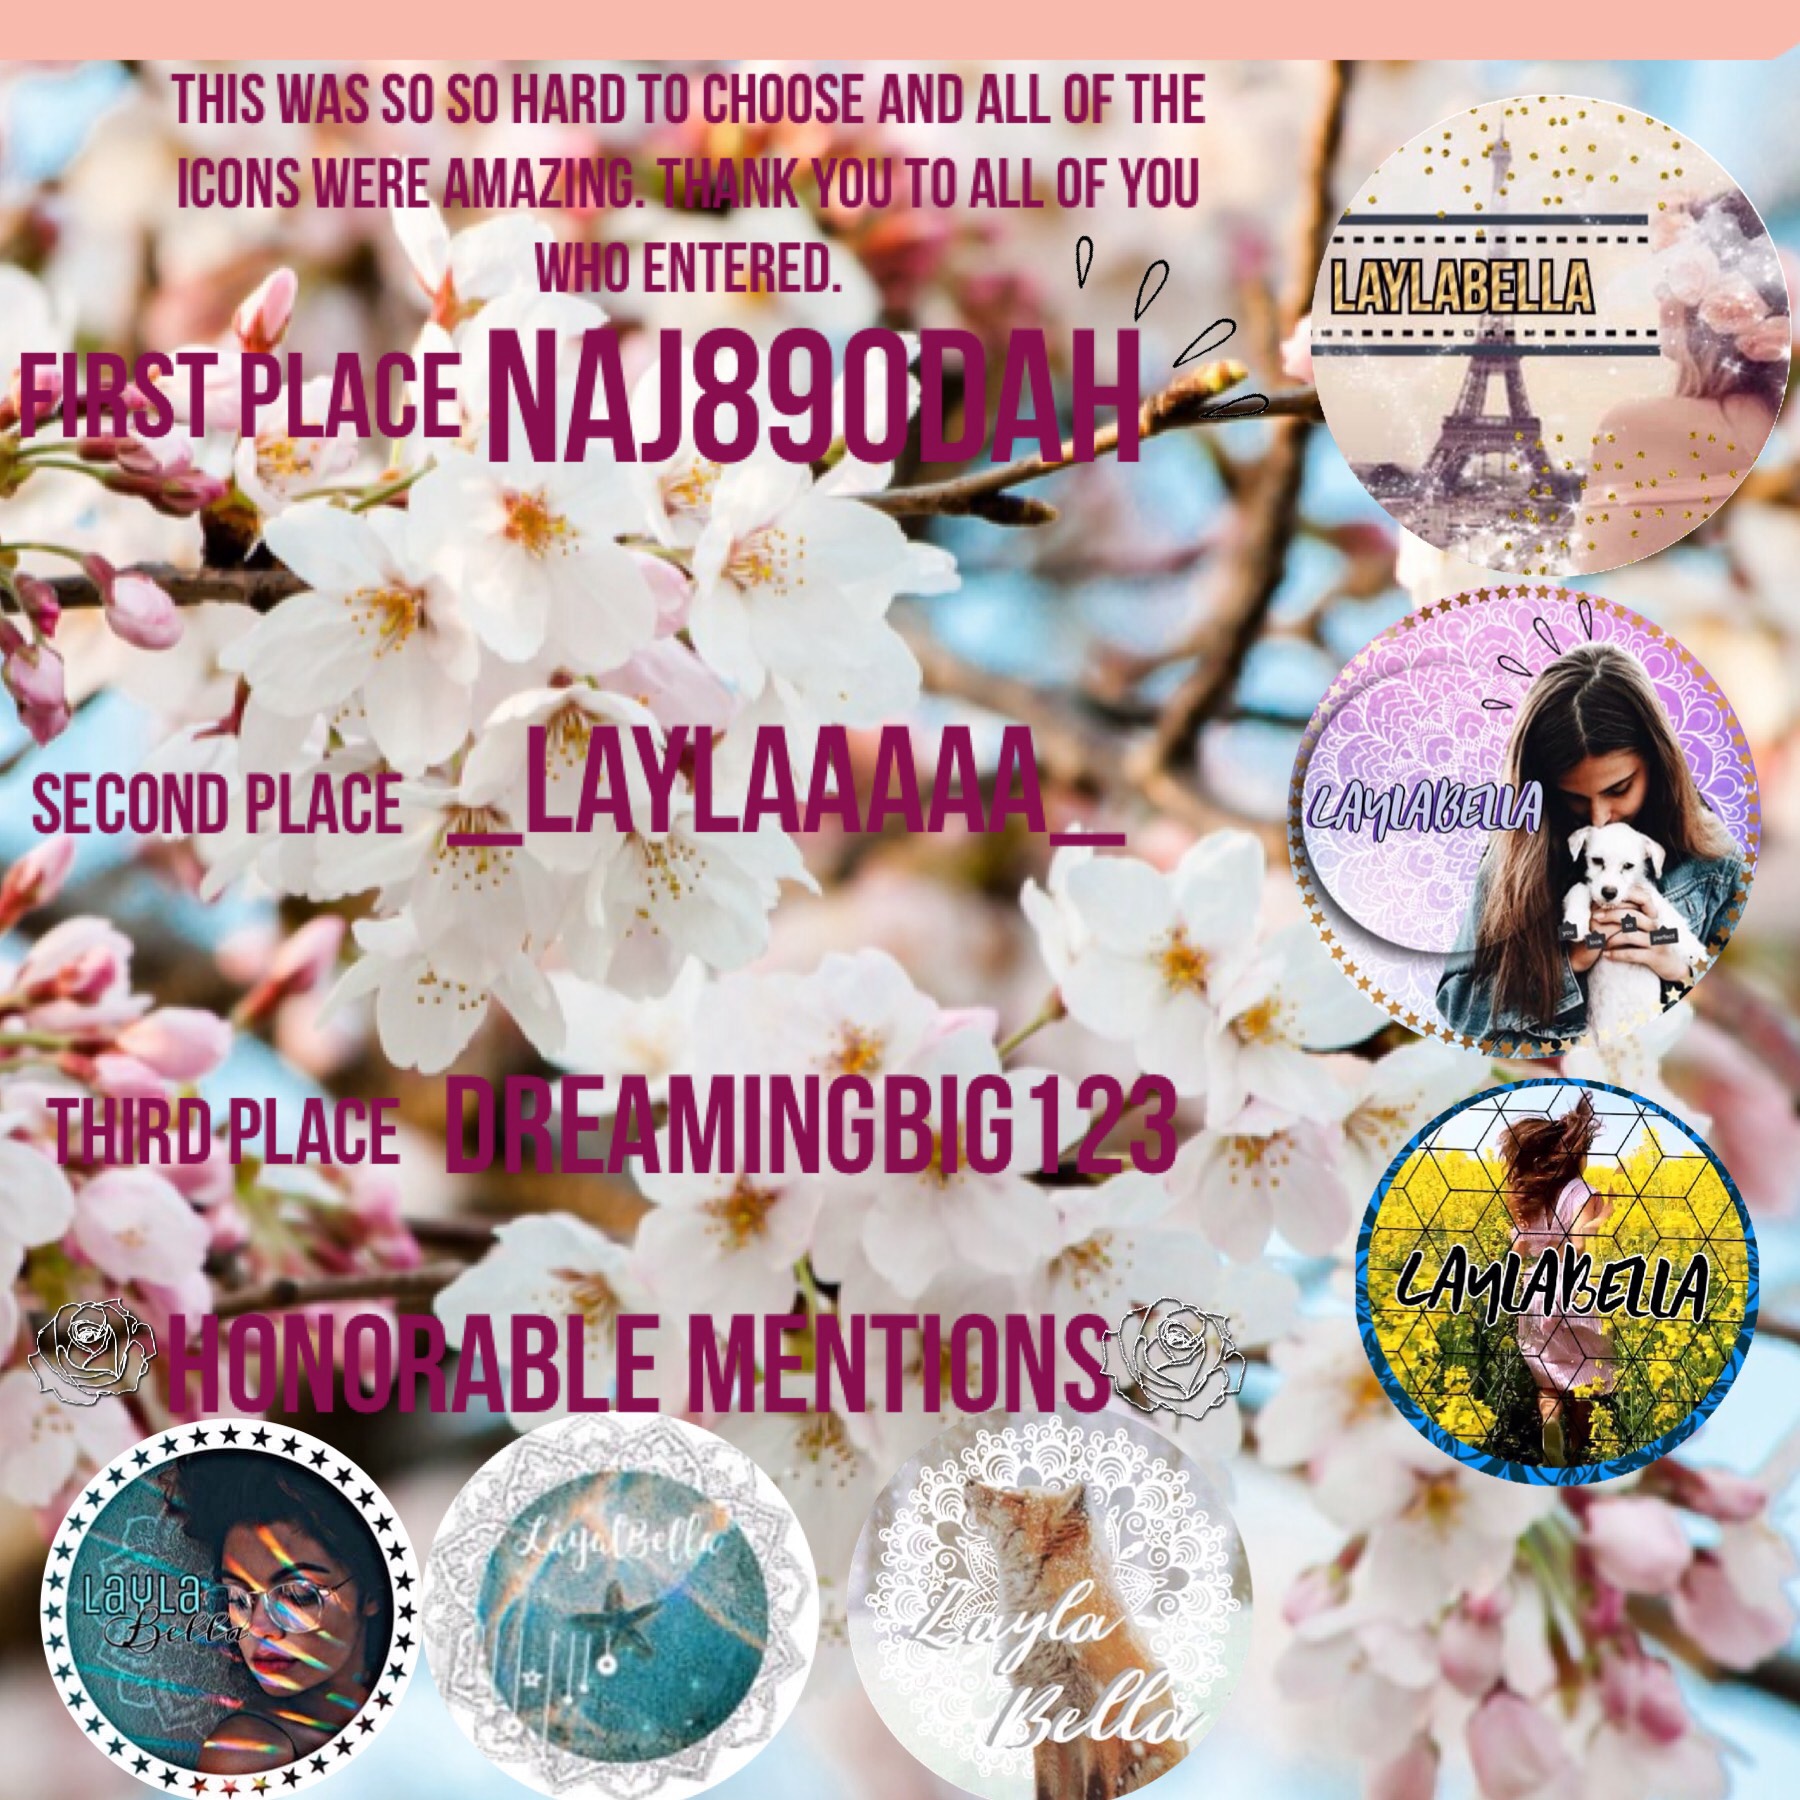 💕Thank you to all who entered in the contest all the icons were amazing💕